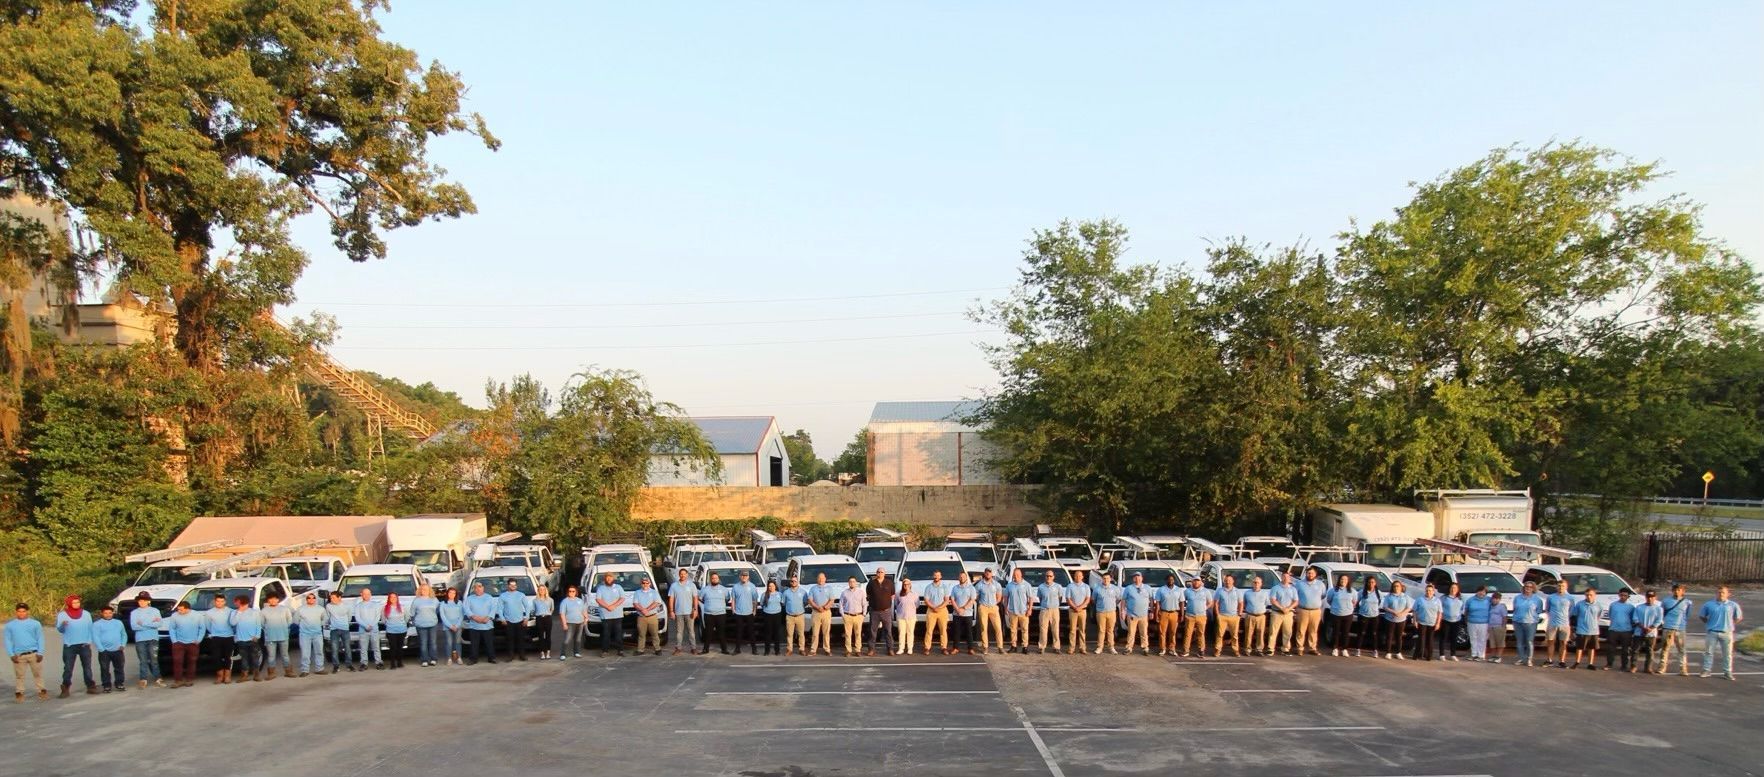 A large group of people are standing in a parking lot.